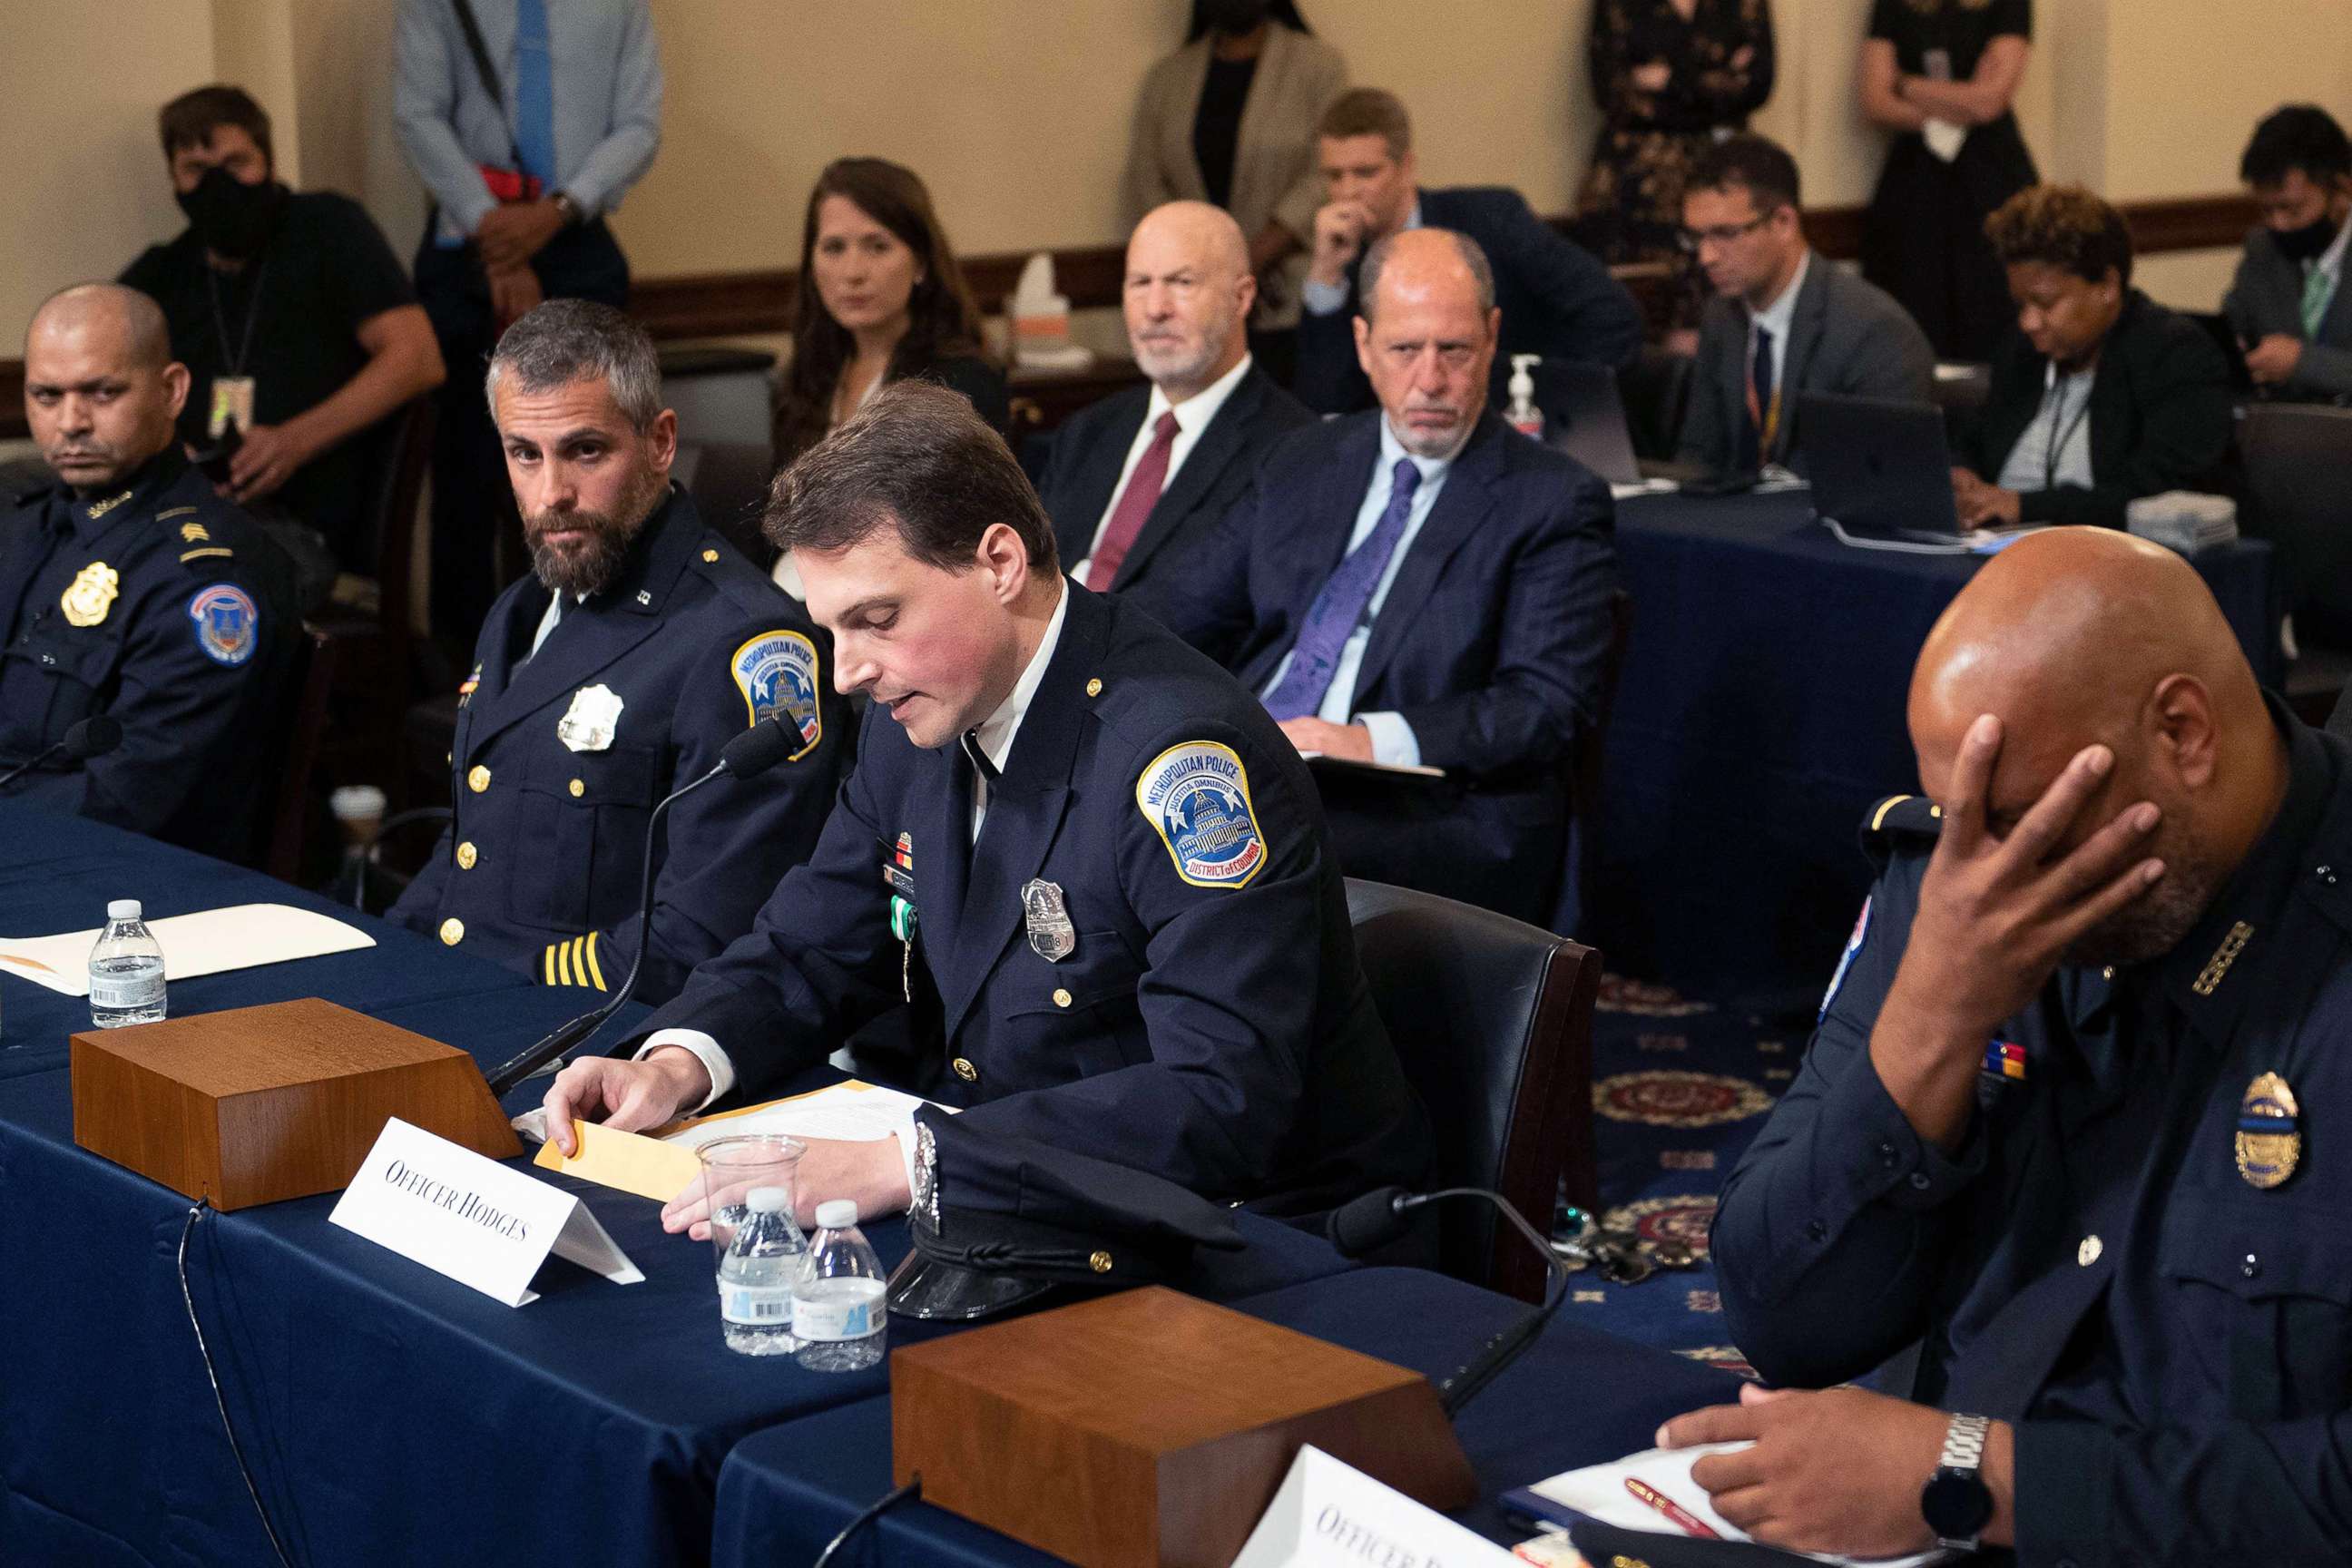 PHOTO: From left, officers Sgt. Aquilino Gonell, Michael Fanone, Daniel Hodges and Harry Dunn testify before the Select Committee on the Jan. 6, 2021, attack on the U.S. Capitol, July 27, 2021, on Capitol Hill in Washington, D.C.